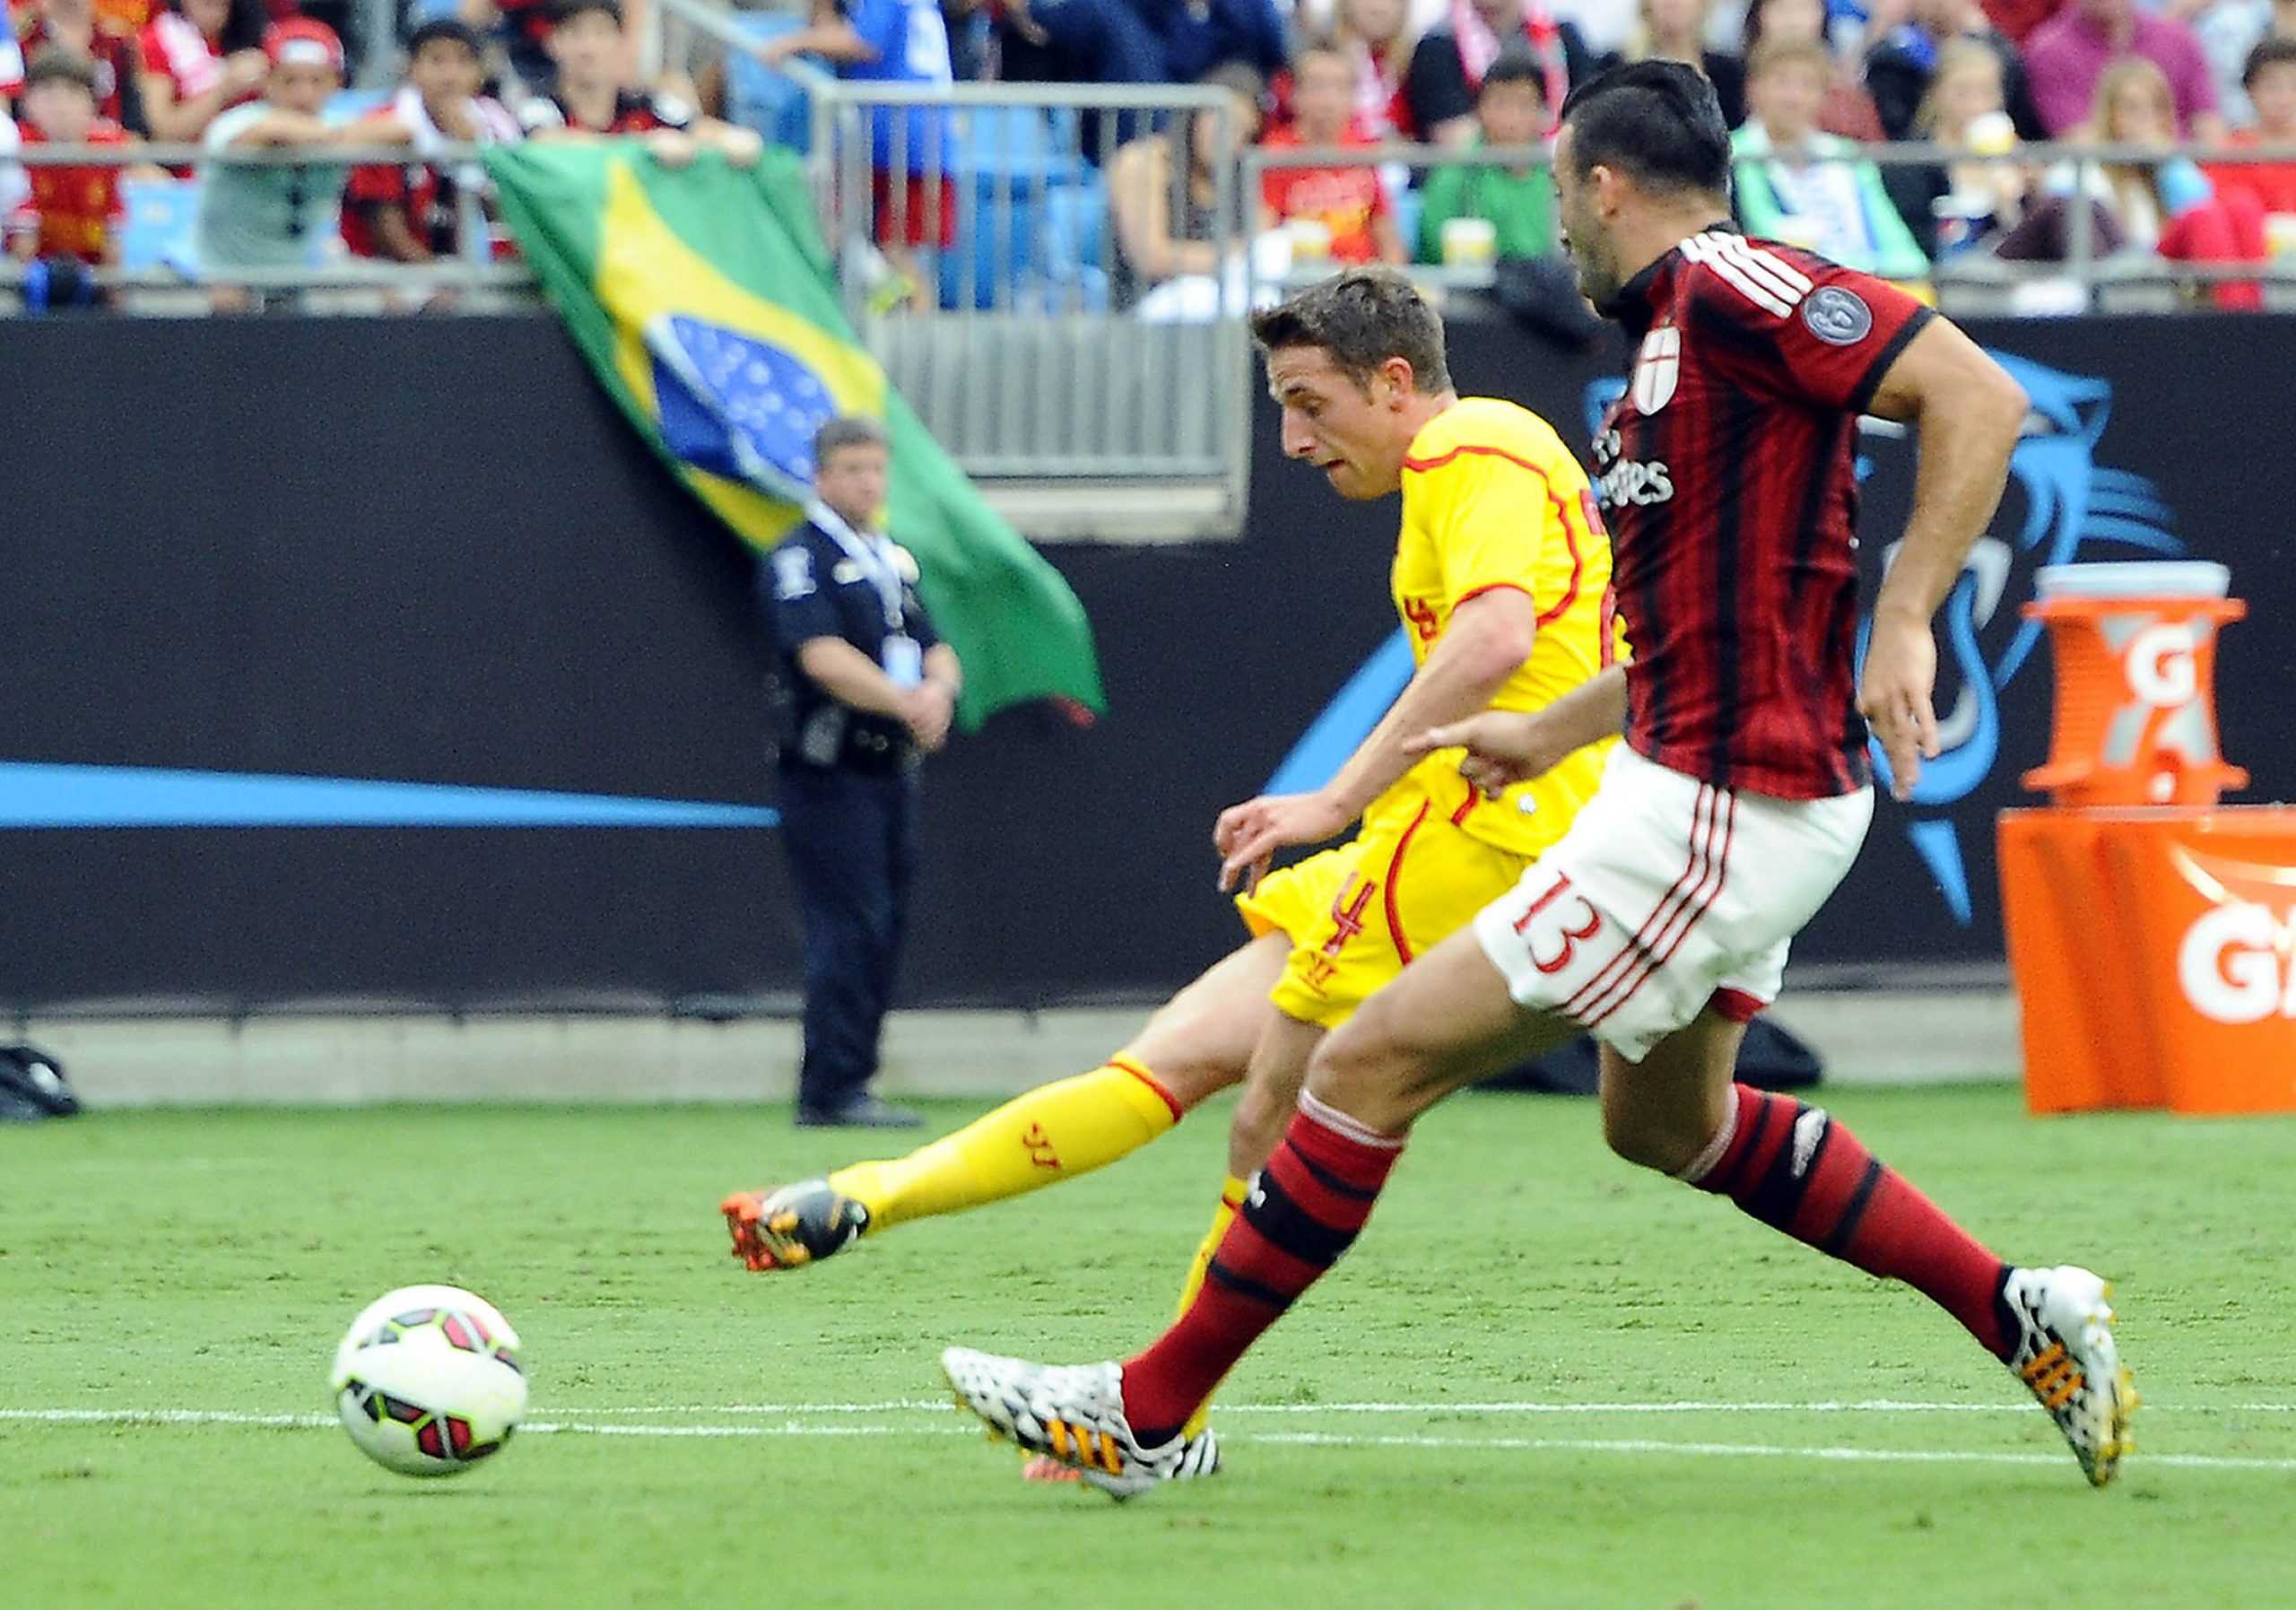 Liverpools Joe Allen shoots past AC Milans Adil Rami (13) in the first half during International Champions Cup semifinals at Bank of America Stadium in Charlotte, N.C., on Saturday, Aug. 2, 2014. Liverpool won, 2-0. (David T. Foster, III/Charlotte Observer/MCT)